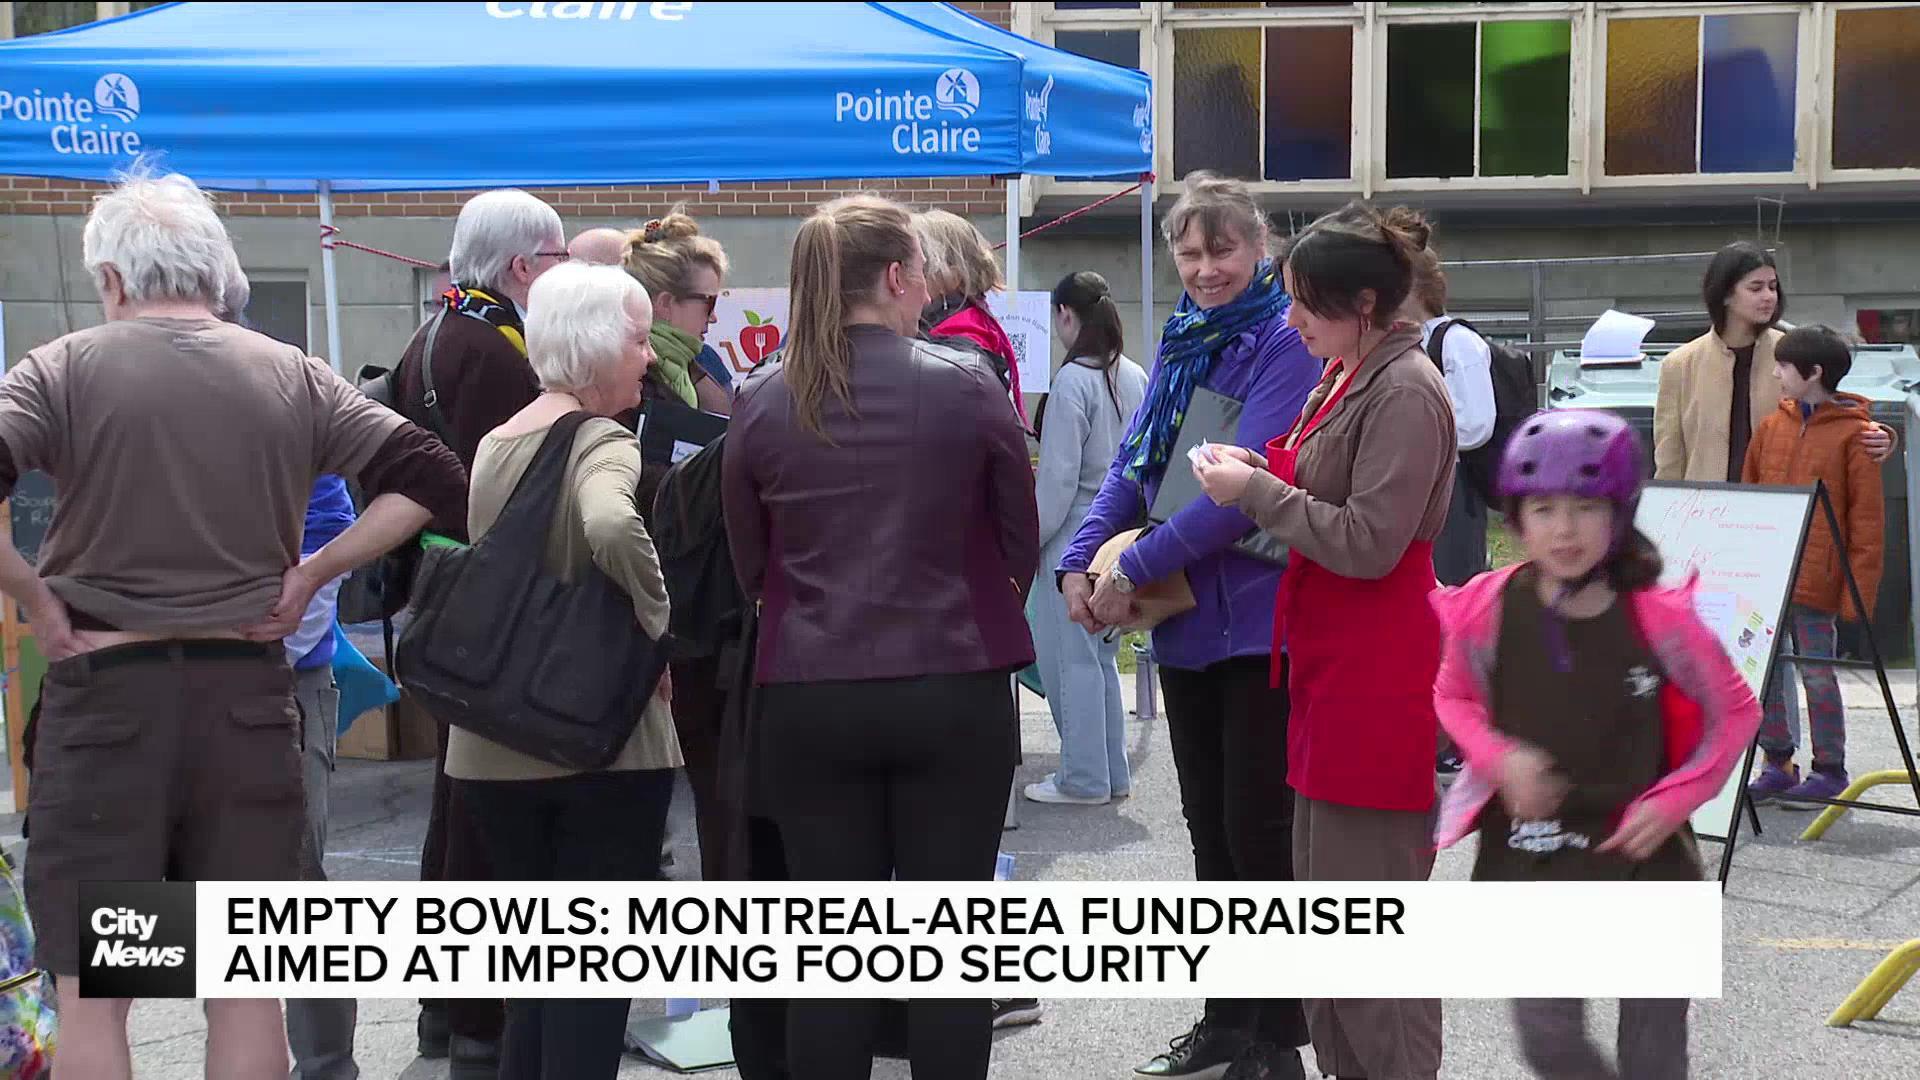 Montrealers improve food insecurity - one bowl at a time